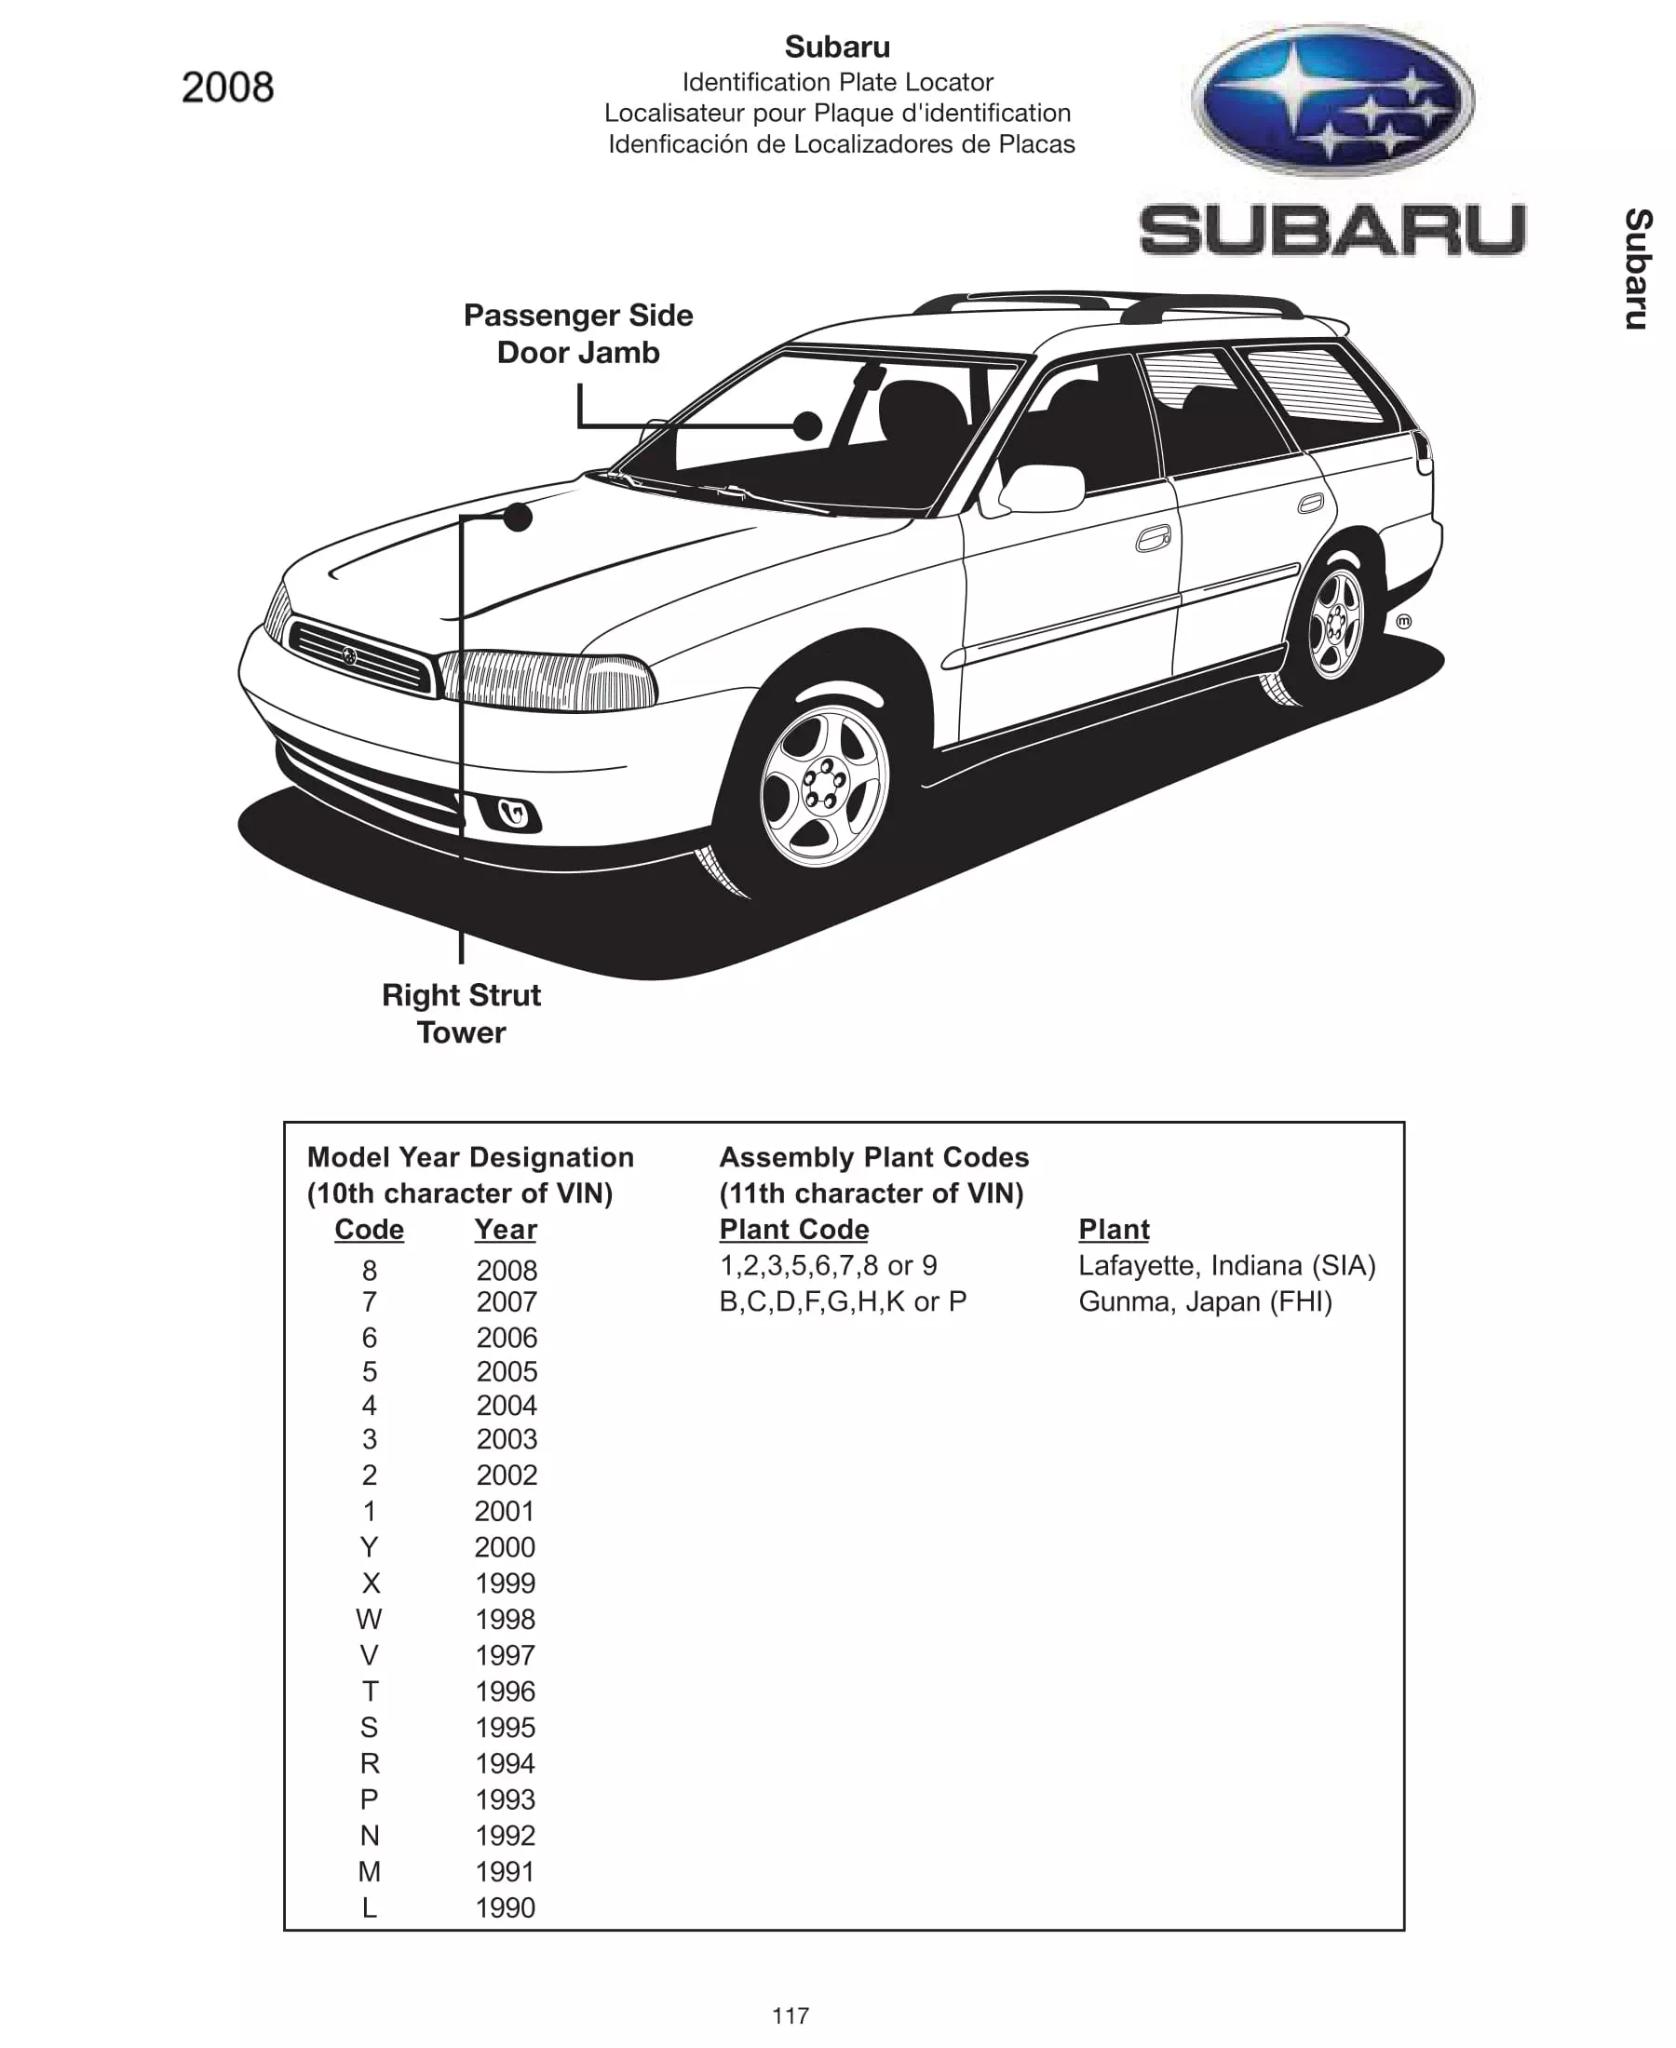 Paint Color and Codes Used By Subaru